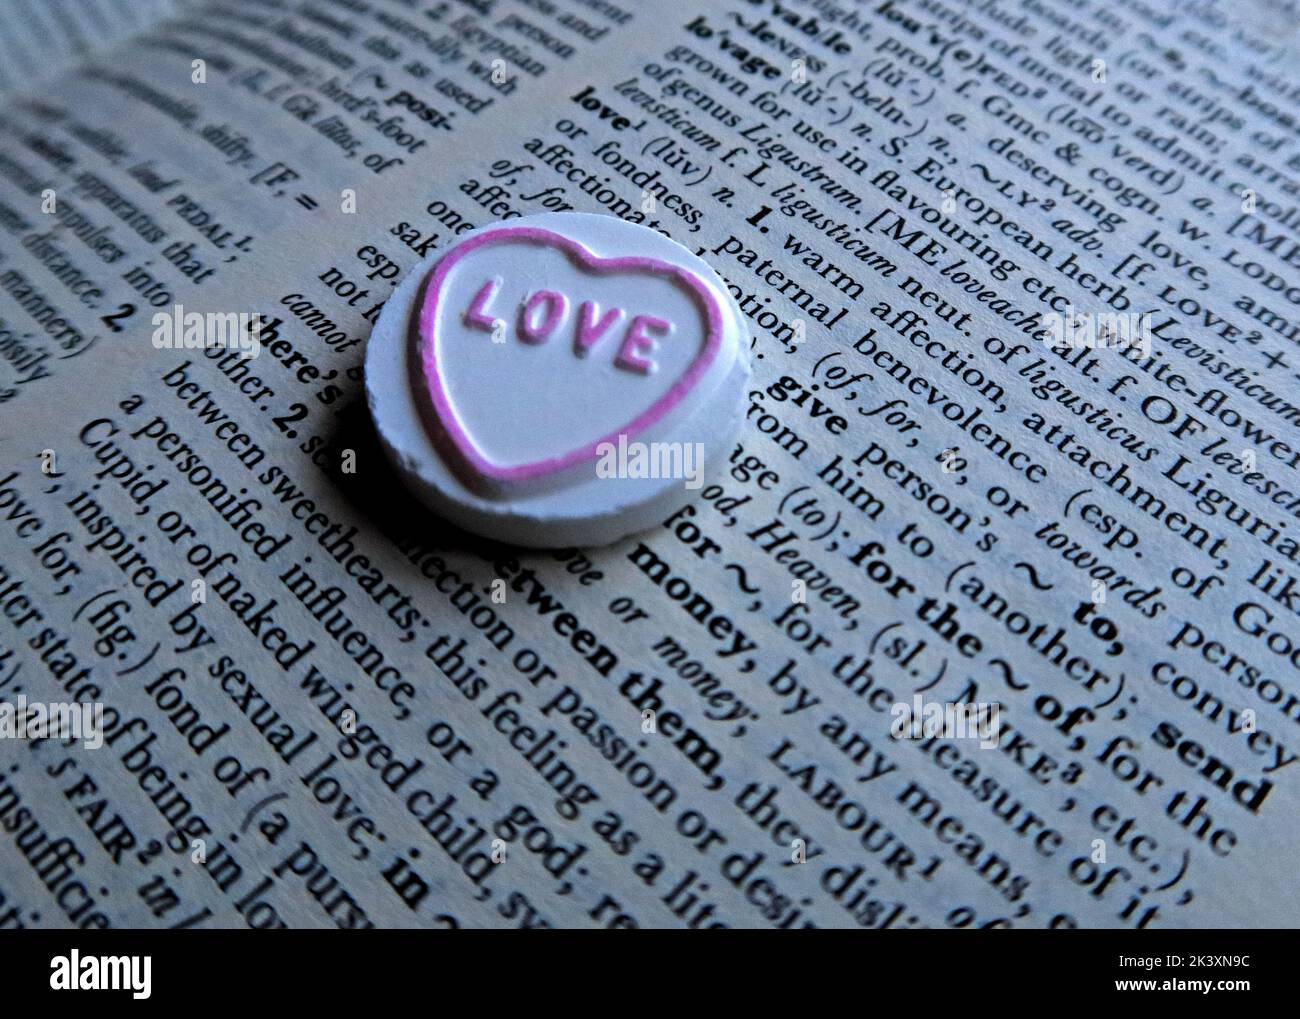 Love Heart, sitting on a dictionary definition of 'Love' Stock Photo